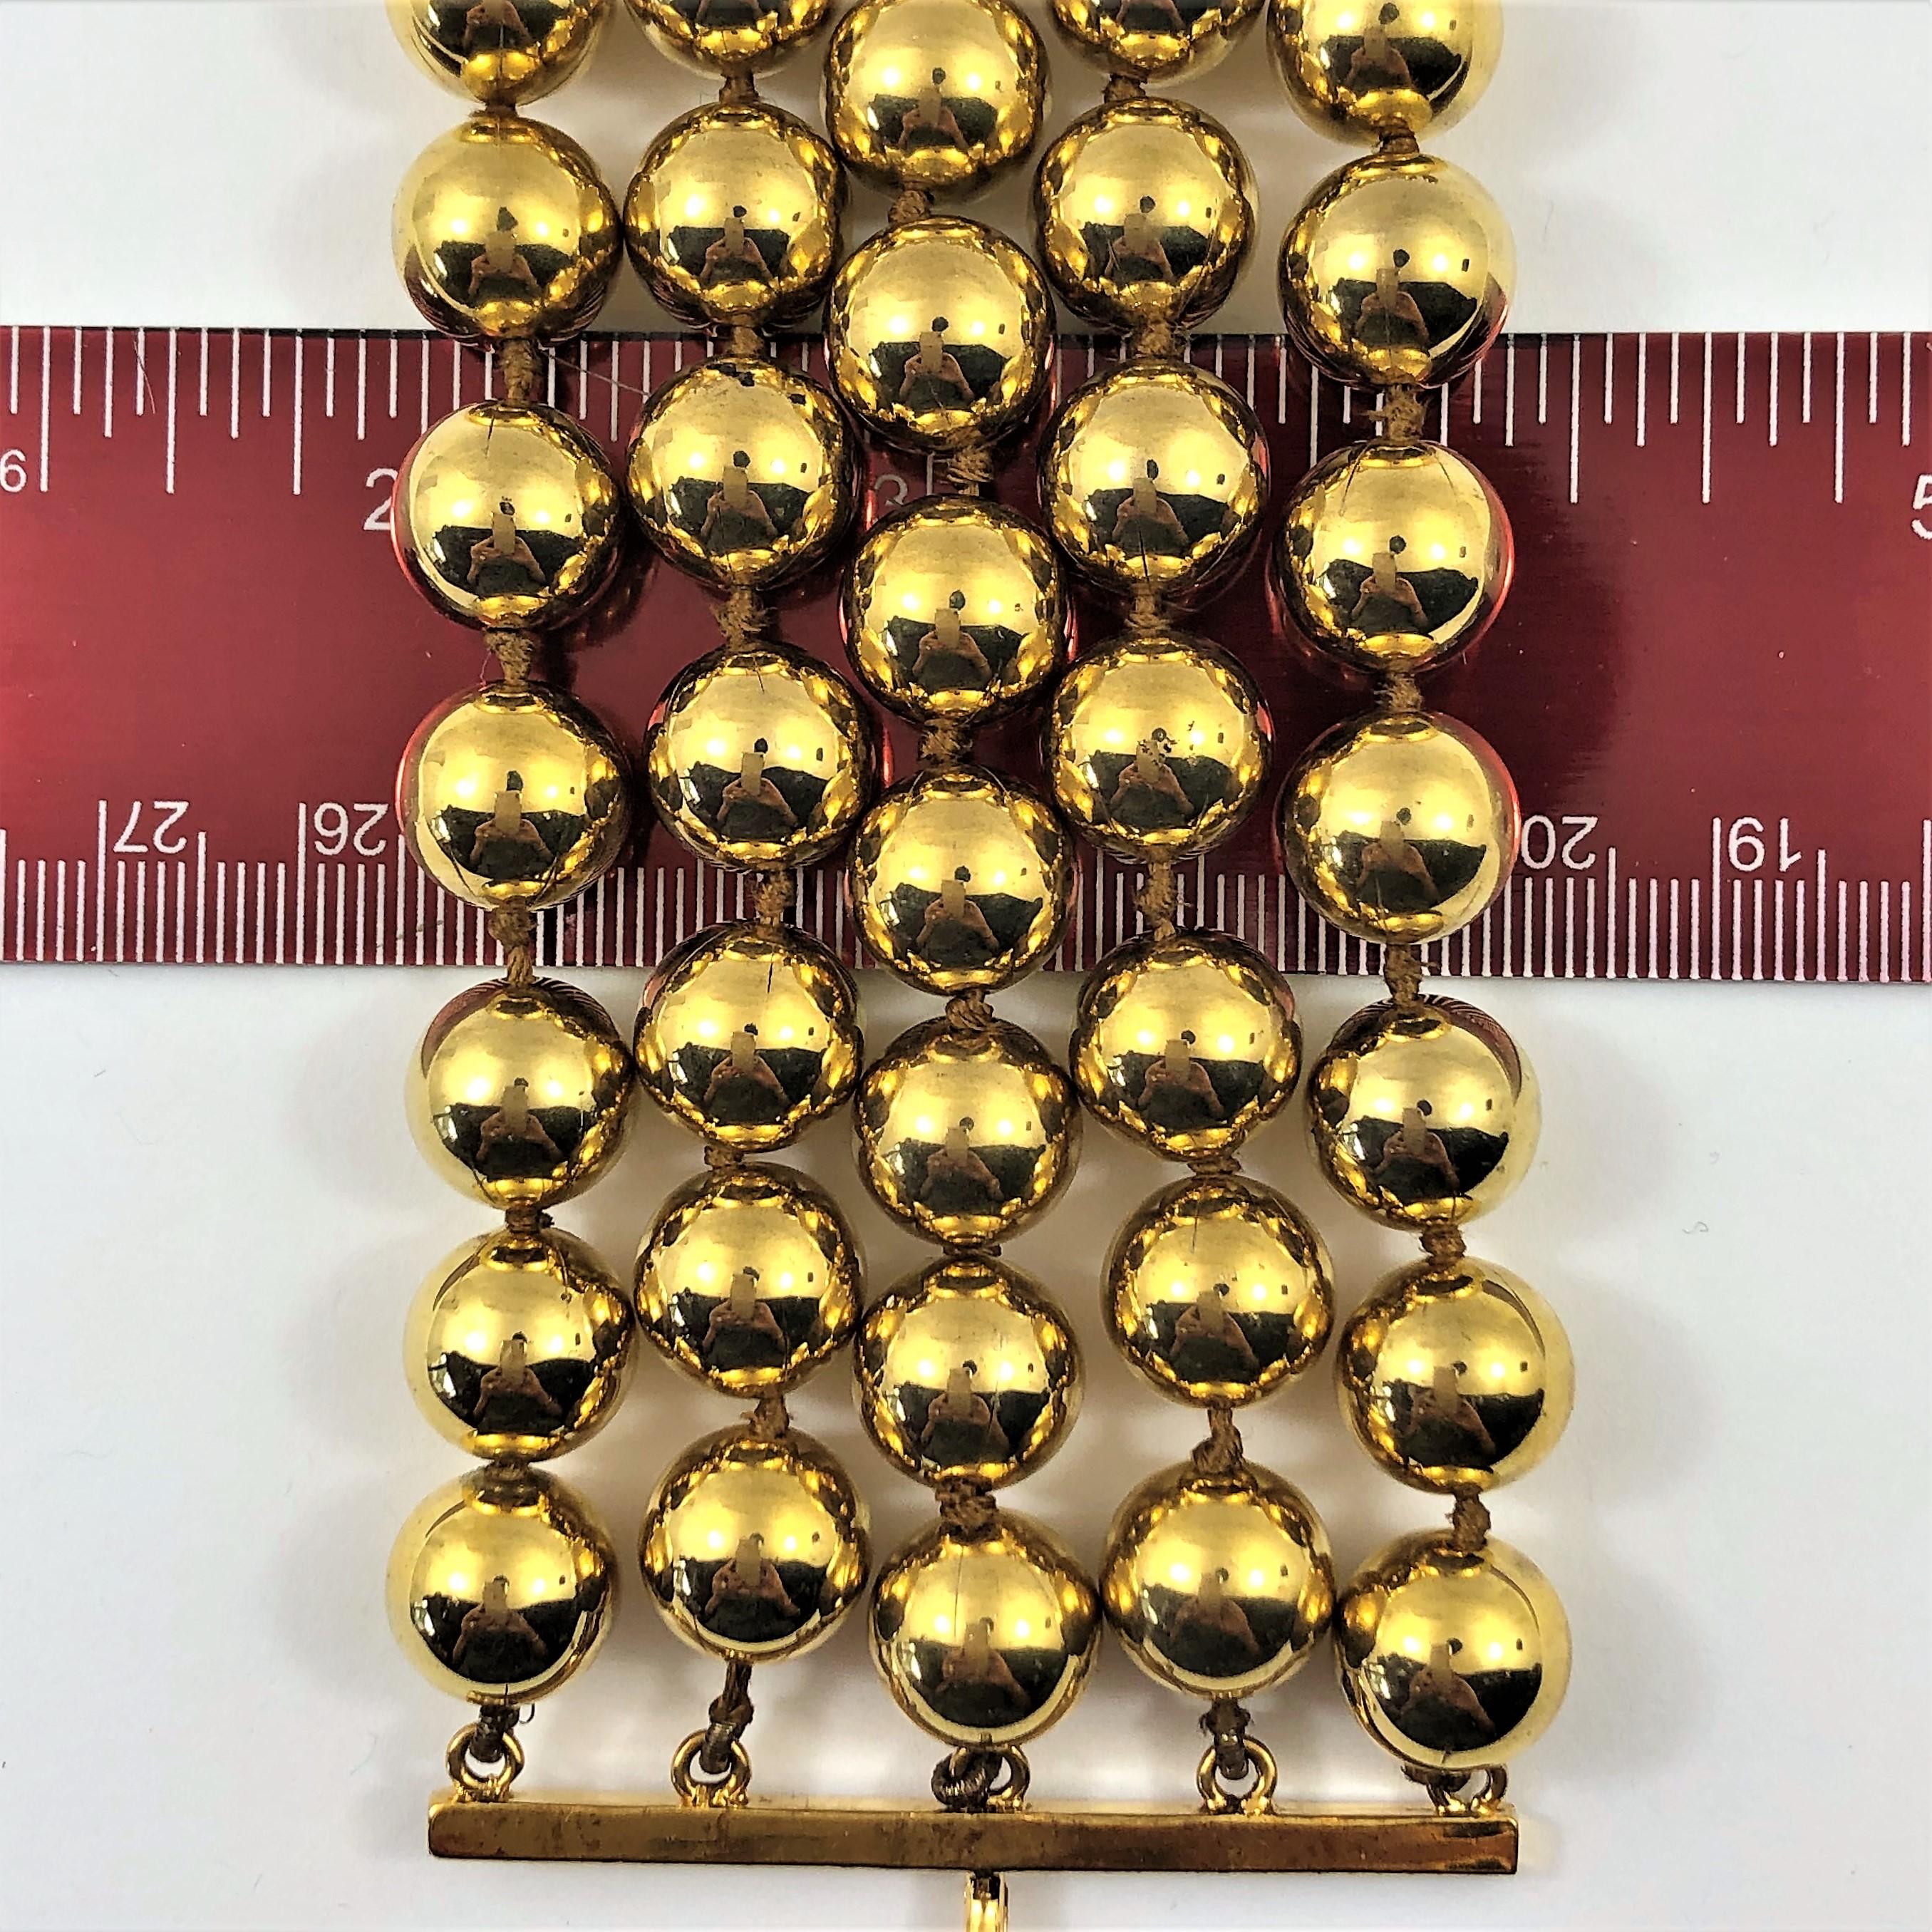 Vintage Chanel Gold Tone Five Row 2 1/4 Inch Wide Ball Bracelet In Good Condition For Sale In Palm Beach, FL